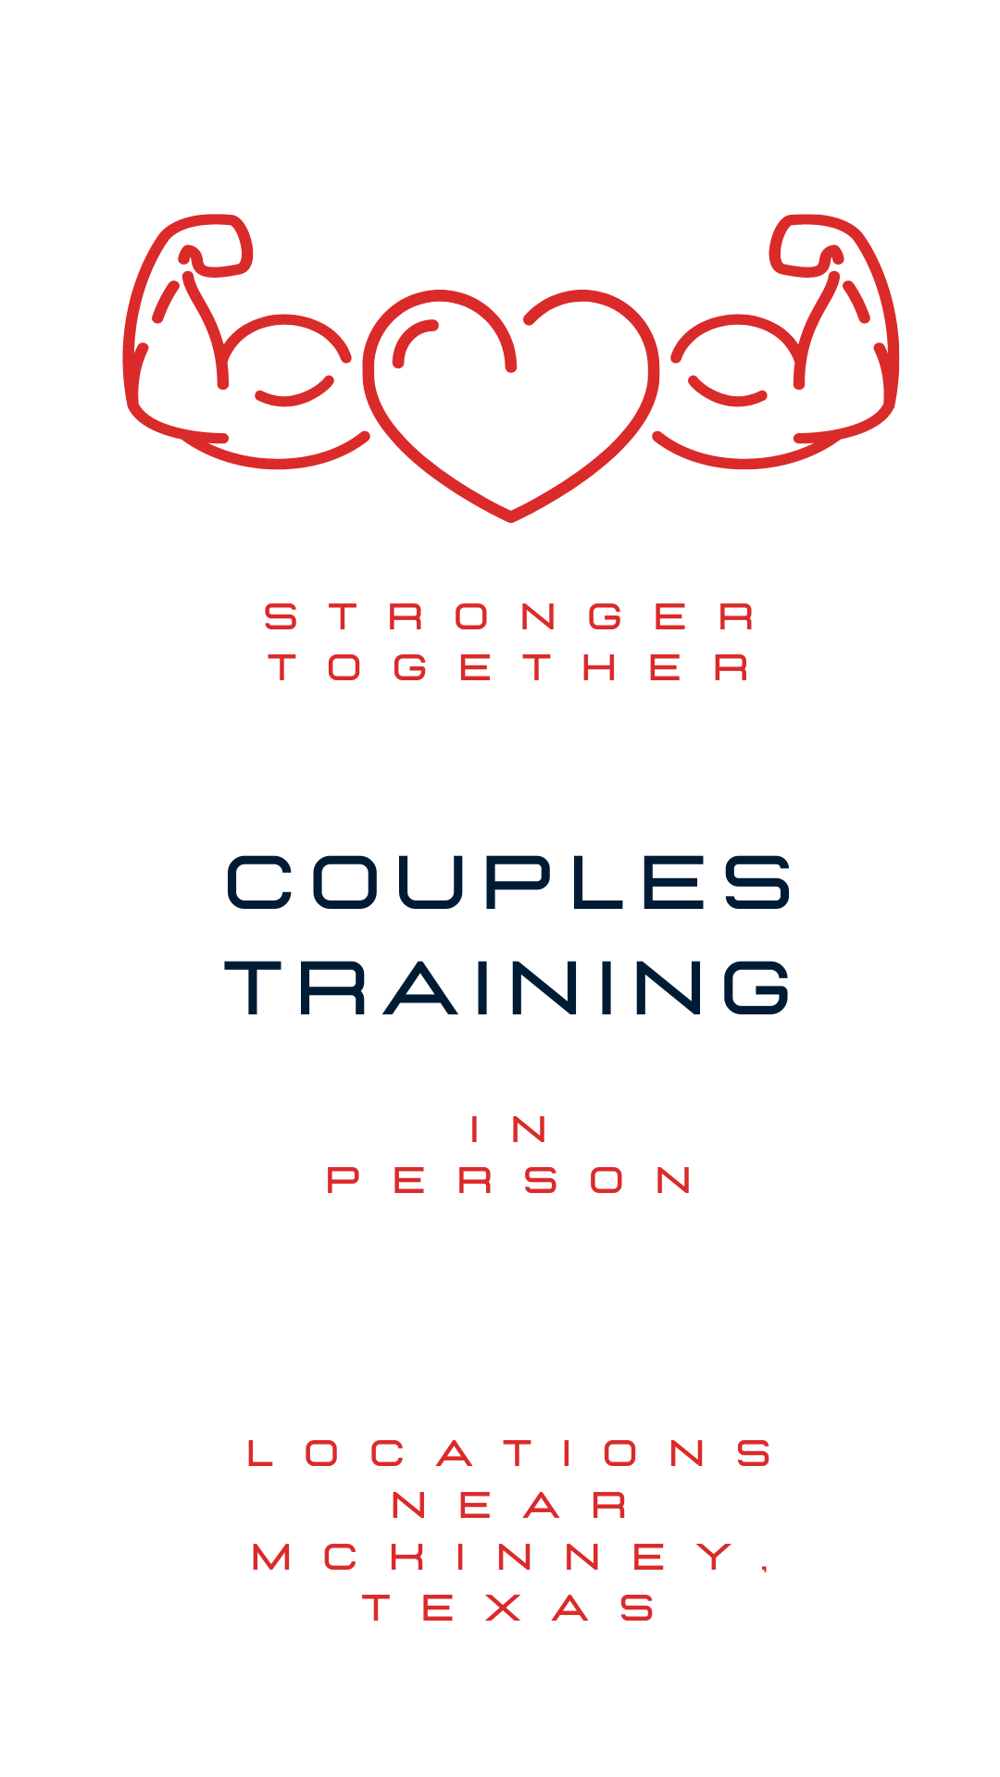 Personal fitness training icon for in-person training for couples that want to workout together near McKinney, Texas